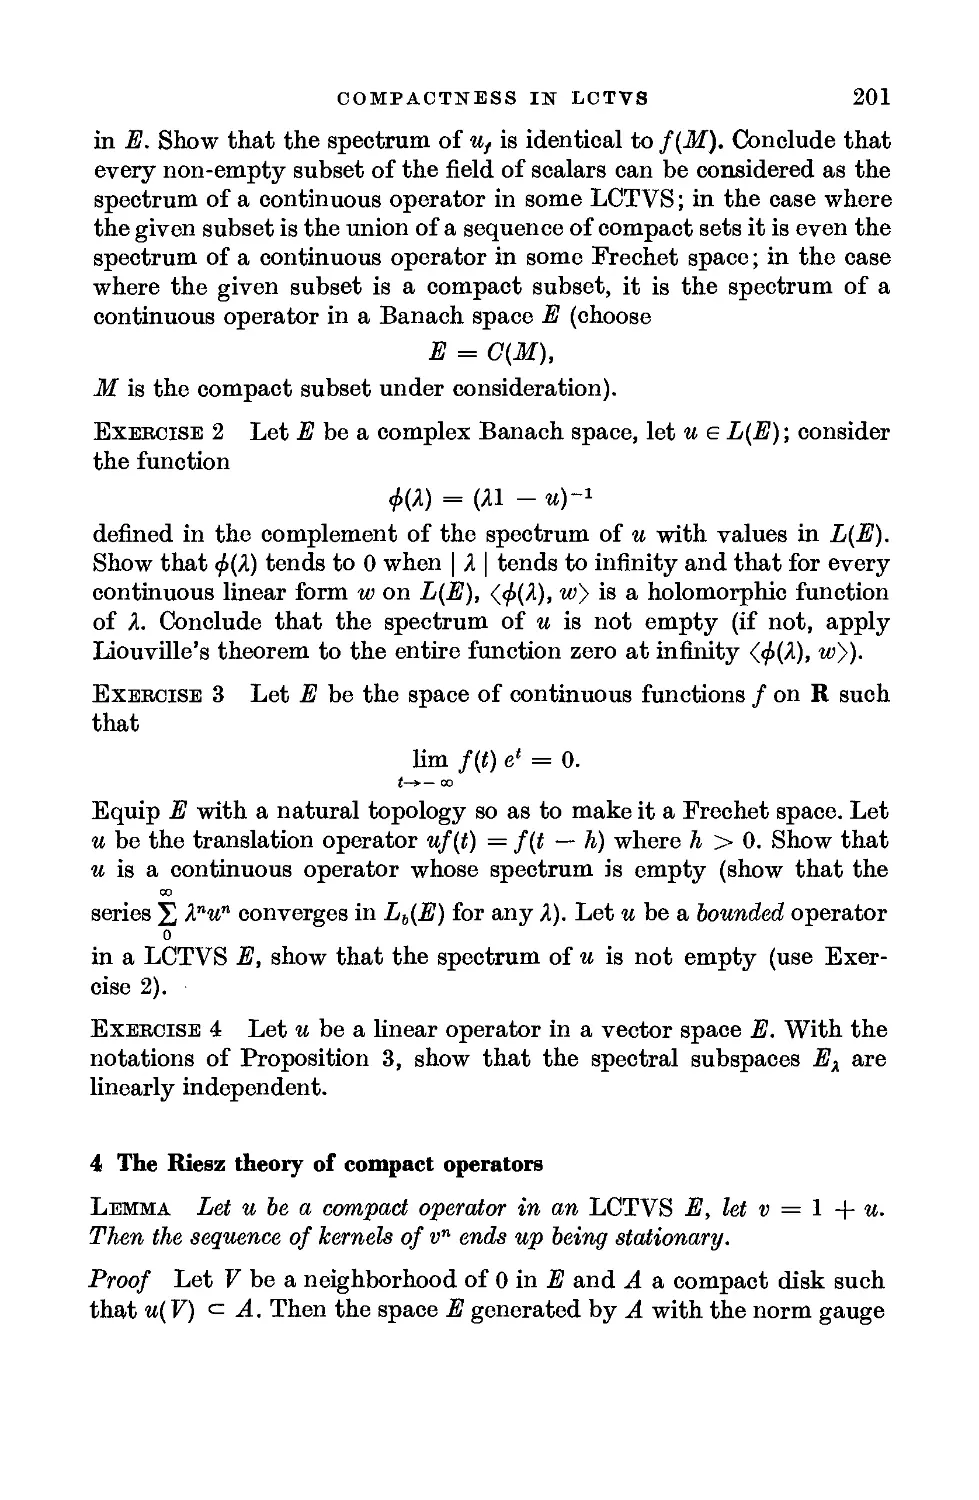 4. The Riesz theory of compact operators